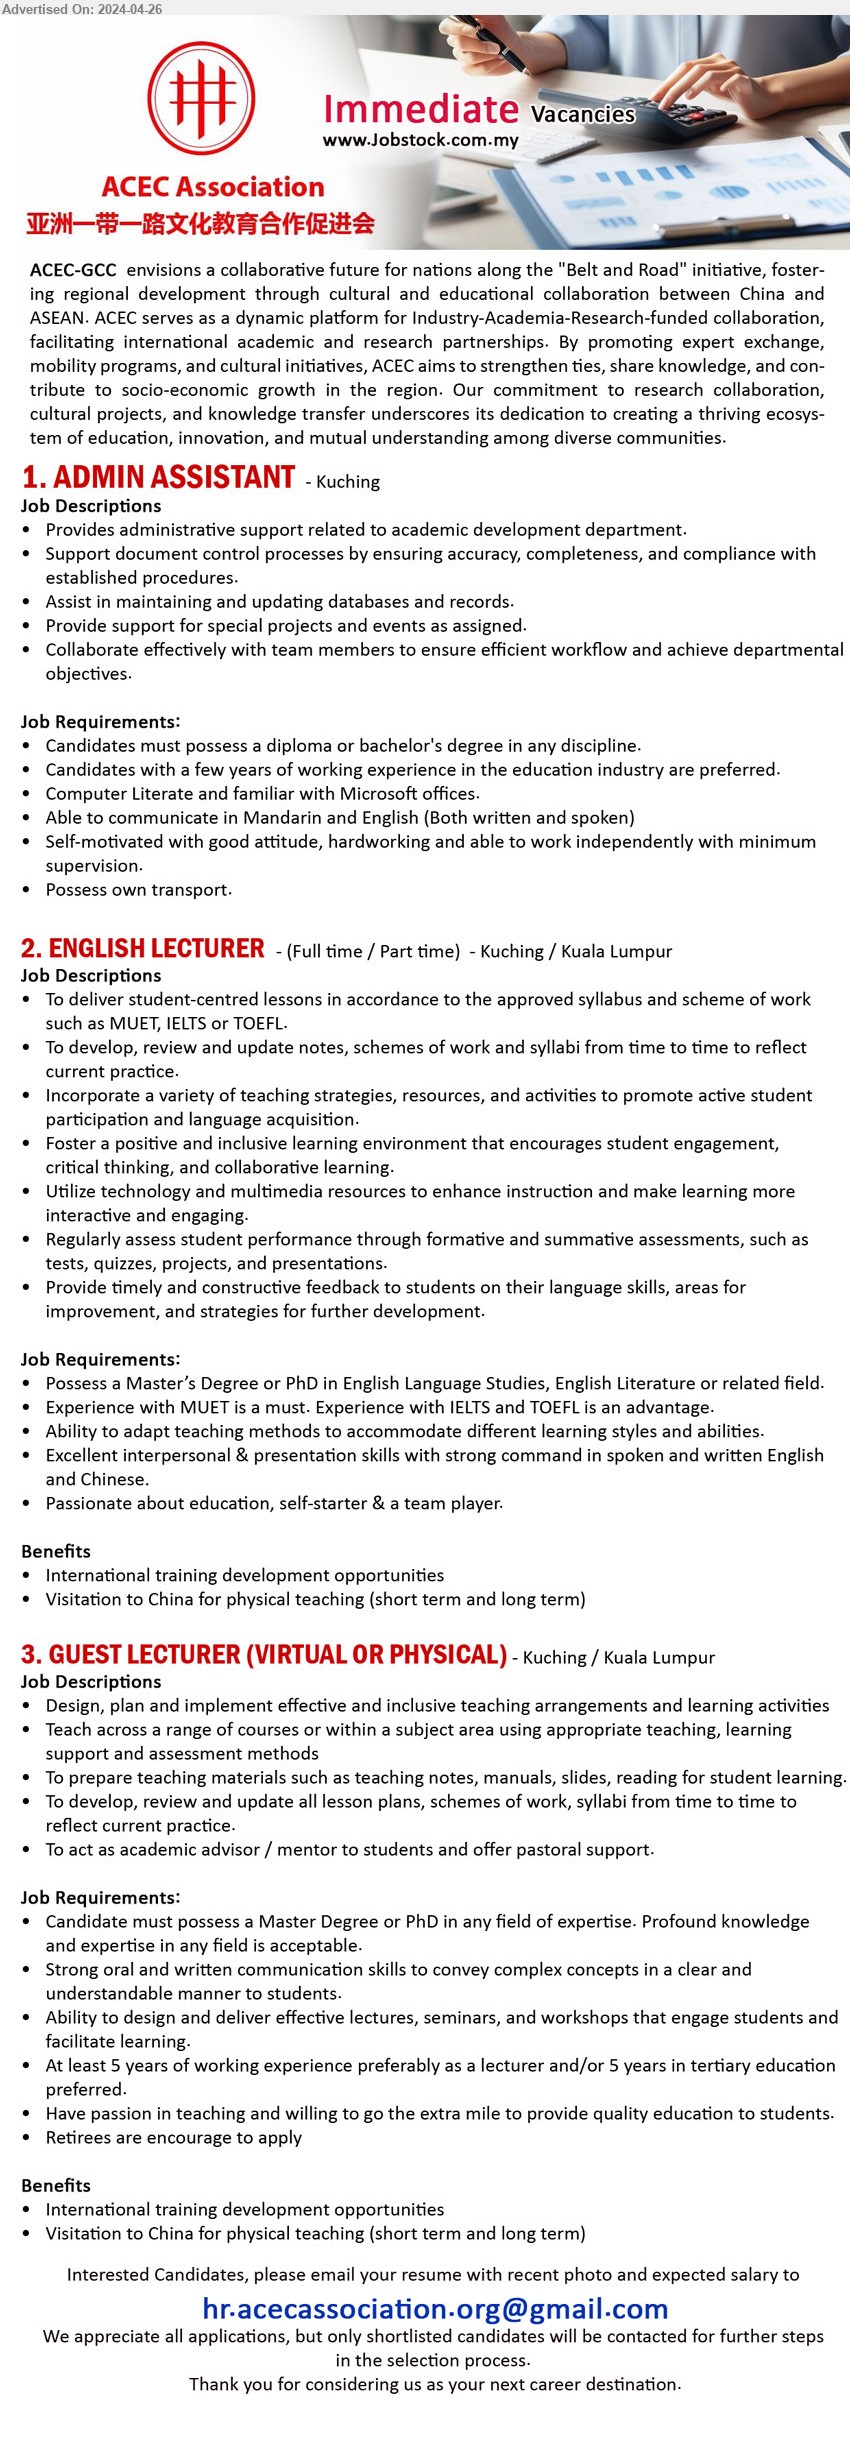 ACEC Association  - 1. ADMIN ASSISTANT  (Kuching), Diploma or Bachelor's Degree, Computer Literate and familiar with Microsoft offices.,...
2. ENGLISH LECTURER (Kuching, KL), Master’s Degree or PhD in English Language Studies, English Literature , experience with MUET is a must. Experience with IELTS and TOEFL is an advantage. ,...
3. GUEST LECTURER (VIRTUAL OR PHYSICAL) (Kuching, KL), Master Degree or PhD in any field of expertise. Profound knowledge & exp., 5 yrs. exp.,...
Email resume to ...
